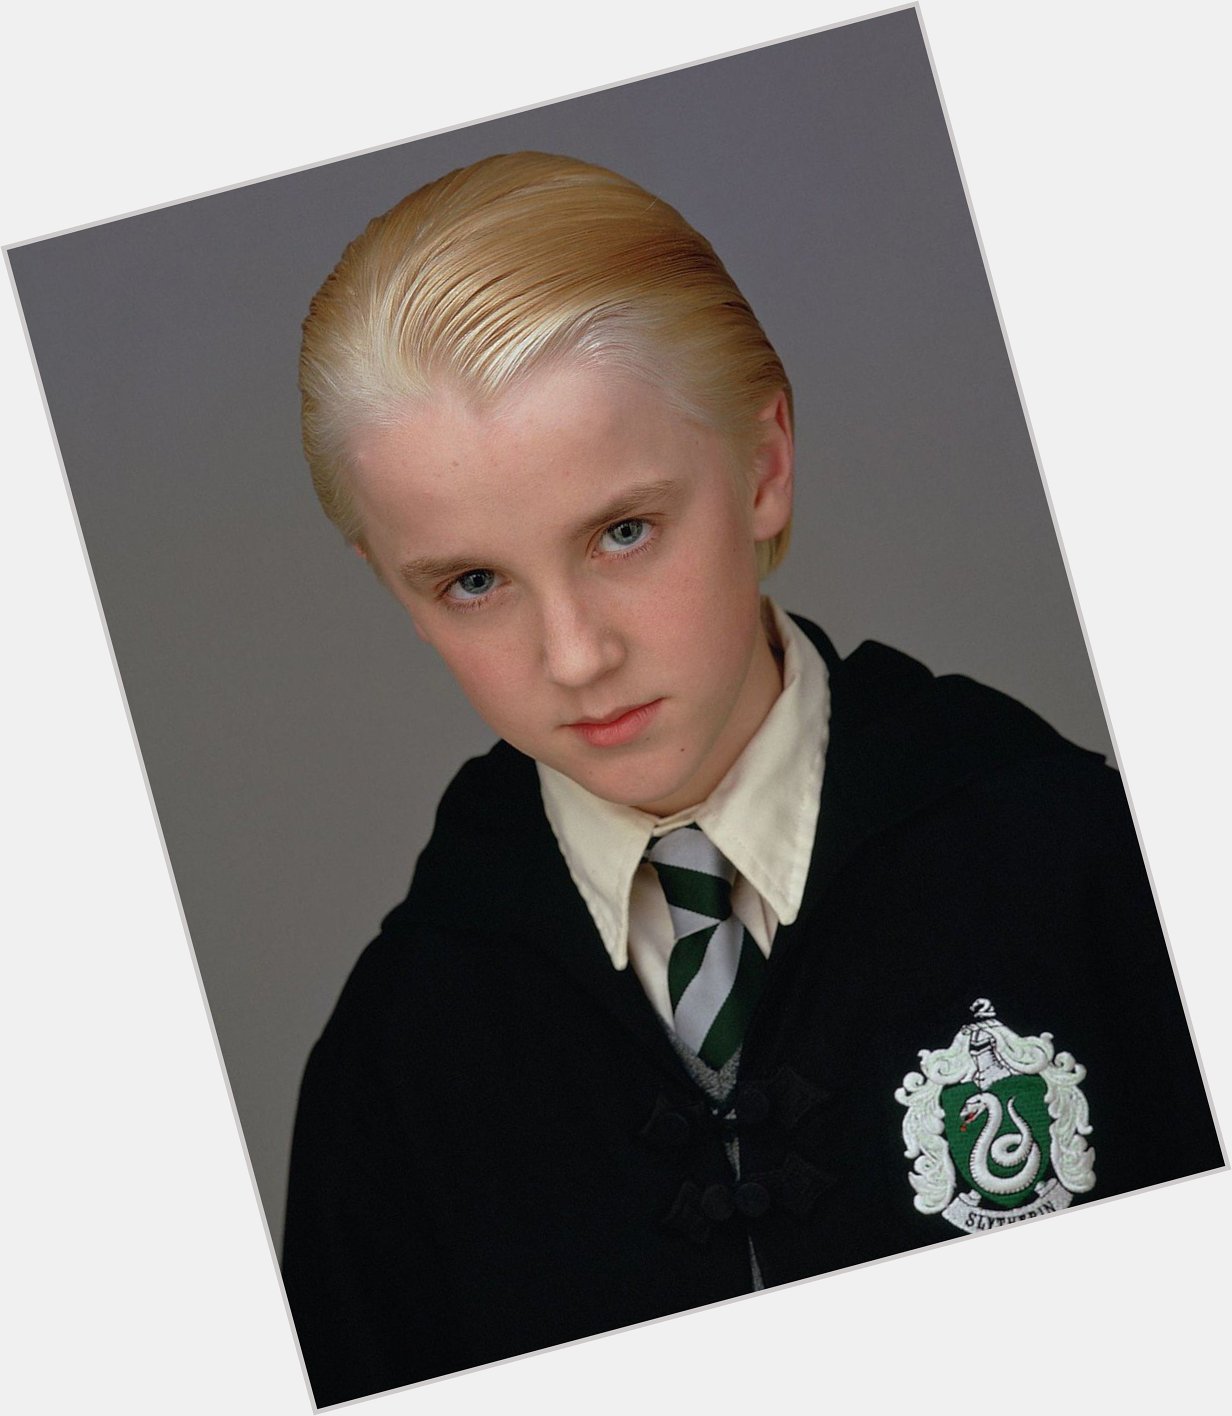 Happy 31st Birthday to Tom Felton. He potrayed the one and only Draco Malfoy! 